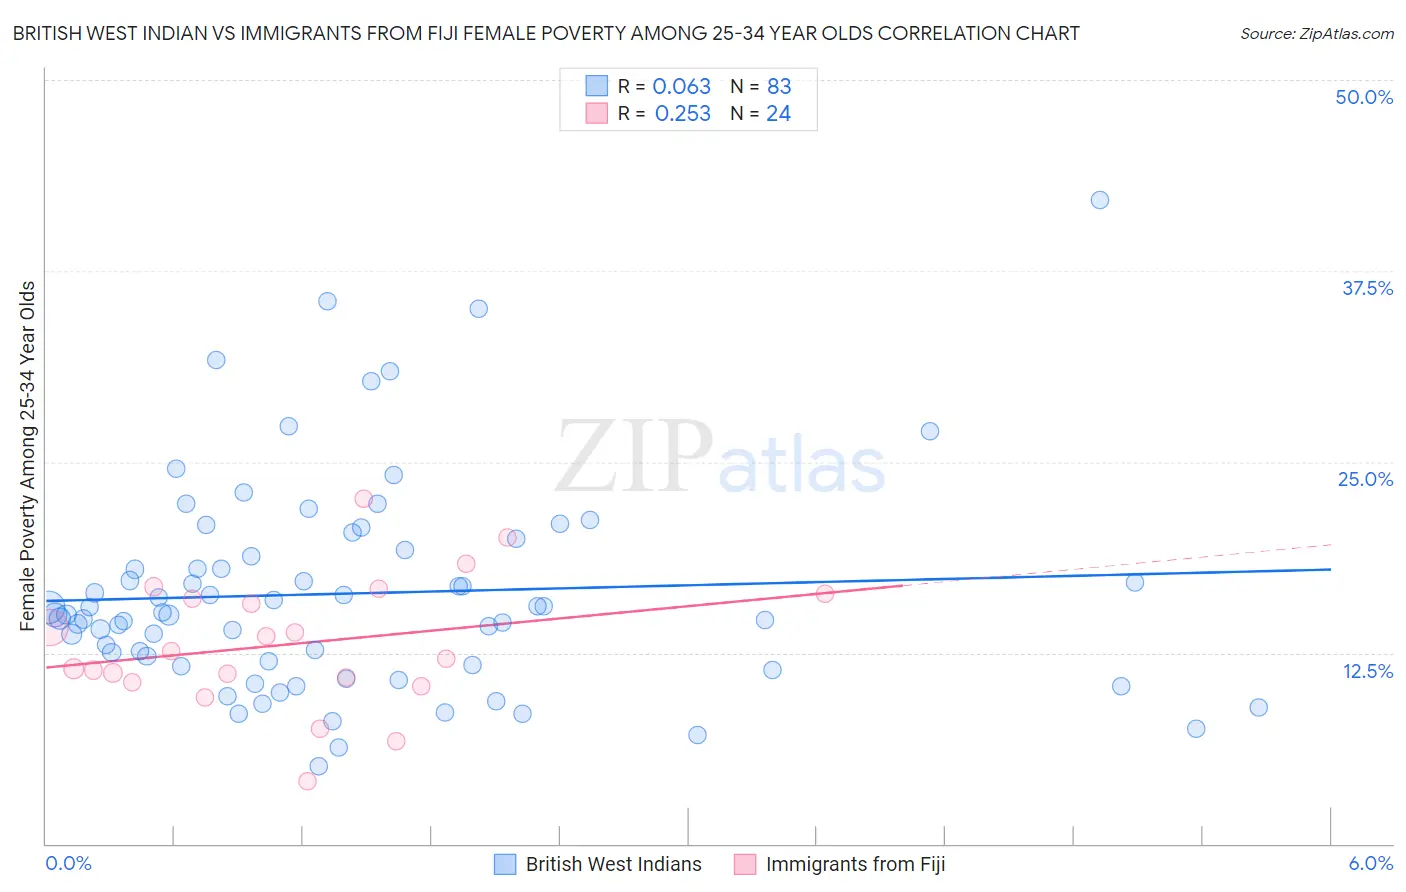 British West Indian vs Immigrants from Fiji Female Poverty Among 25-34 Year Olds